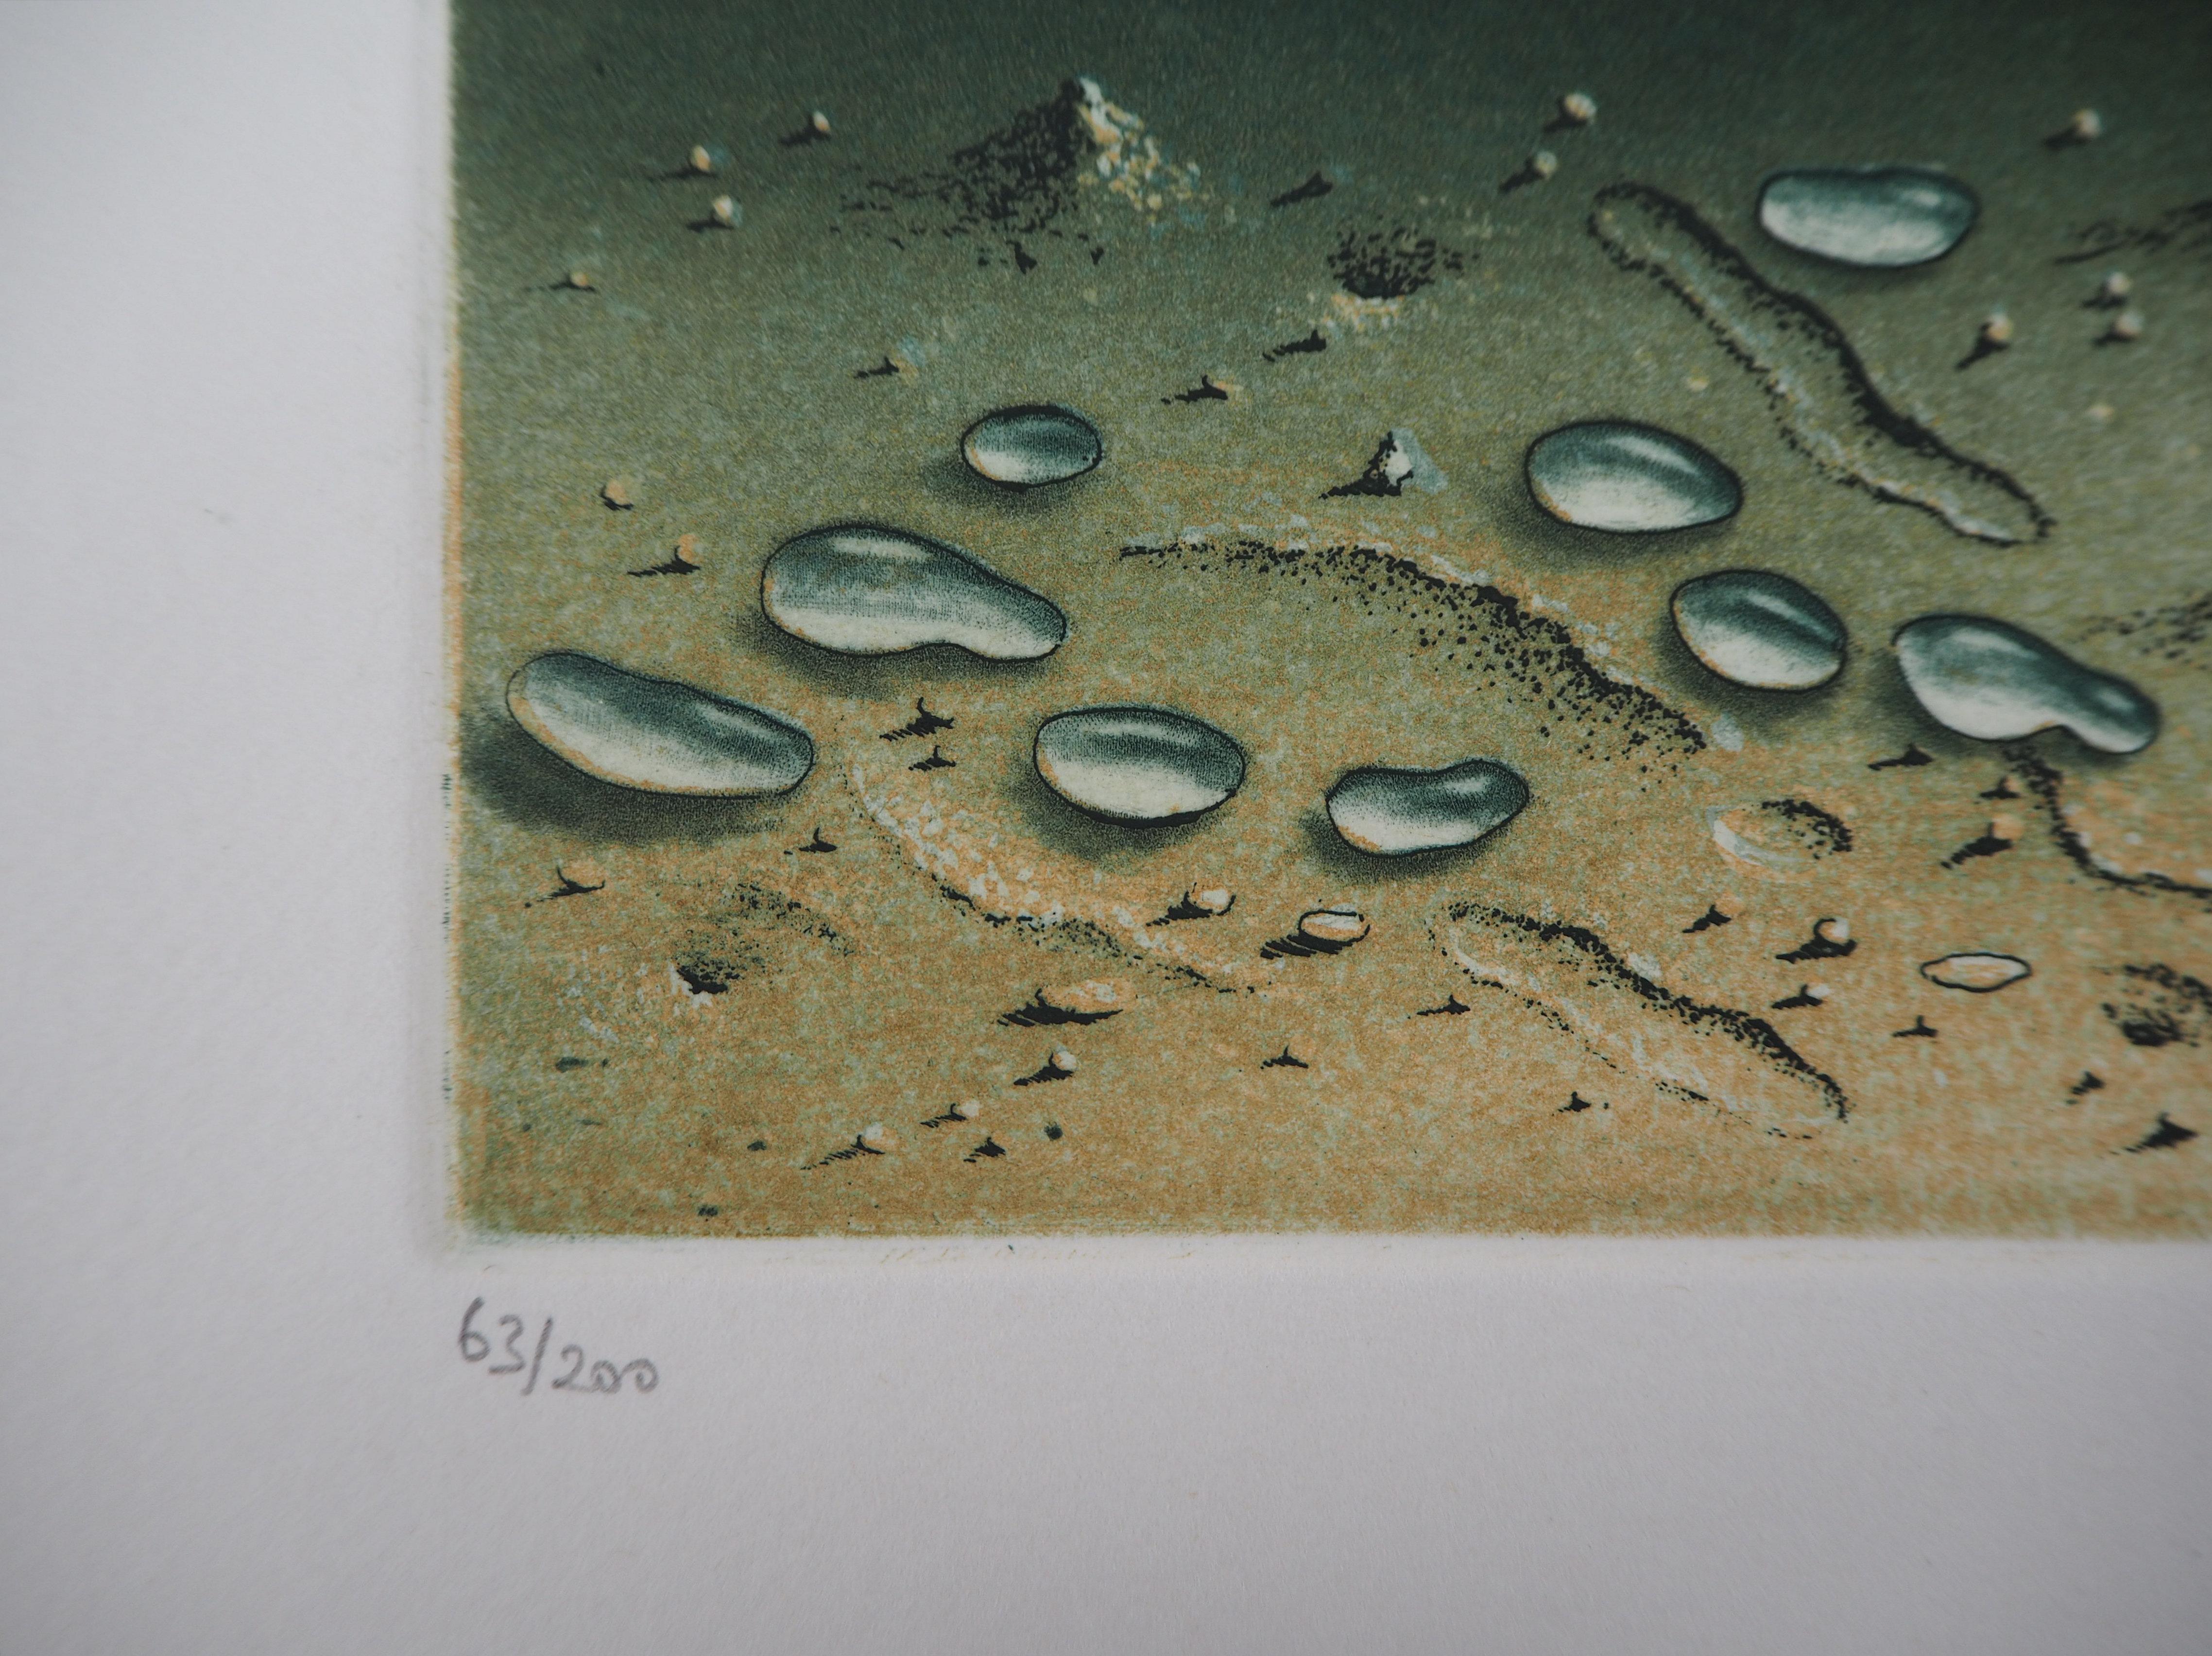 Zen : Water Drops on the Sand - Original handsigned etching - Numbered / 200 - Surrealist Print by Hiroshi Asada